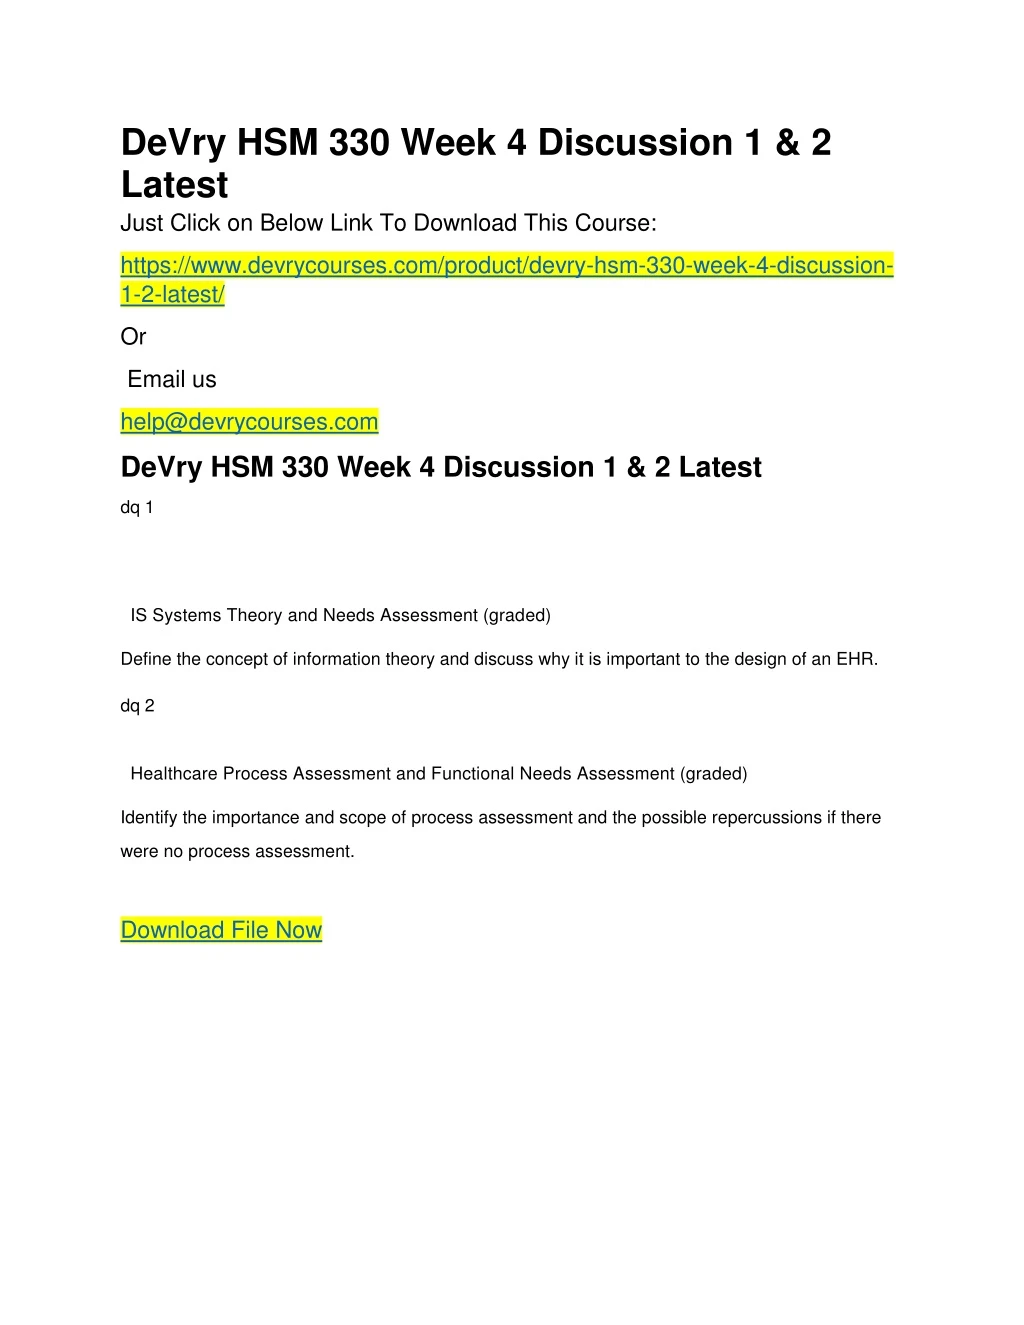 devry hsm 330 week 4 discussion 1 2 latest just